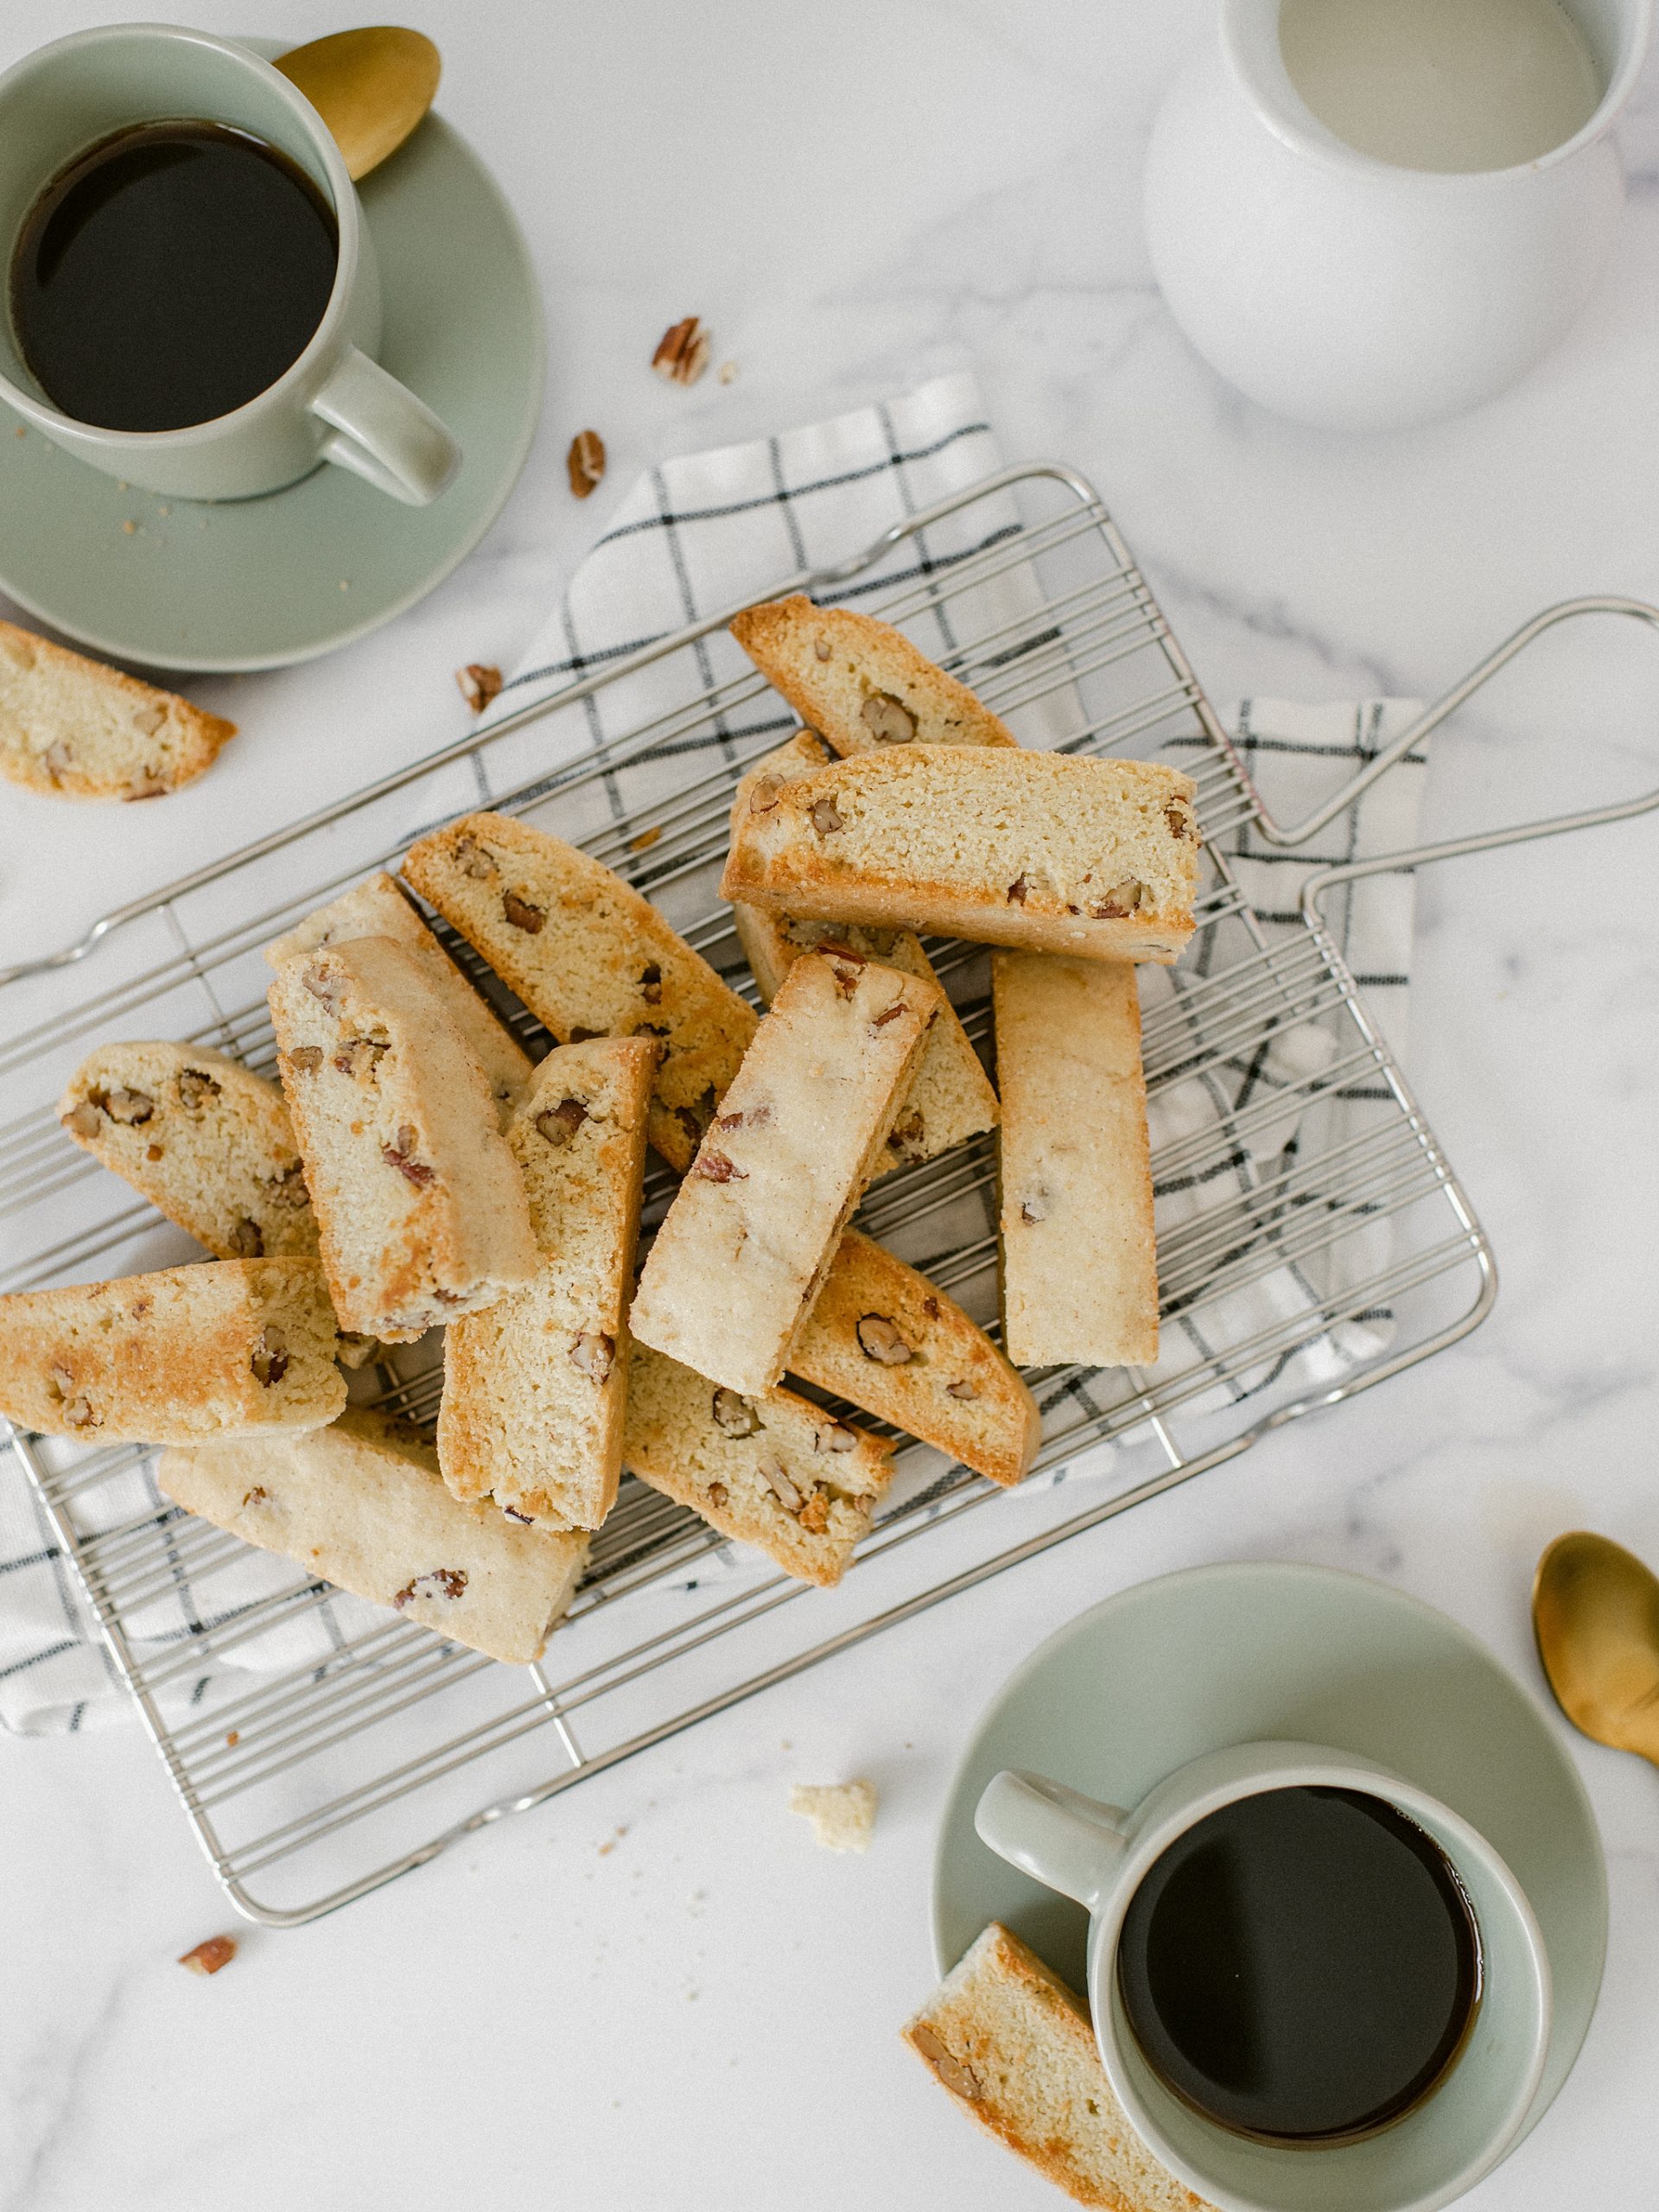 Biscotti served with coffee